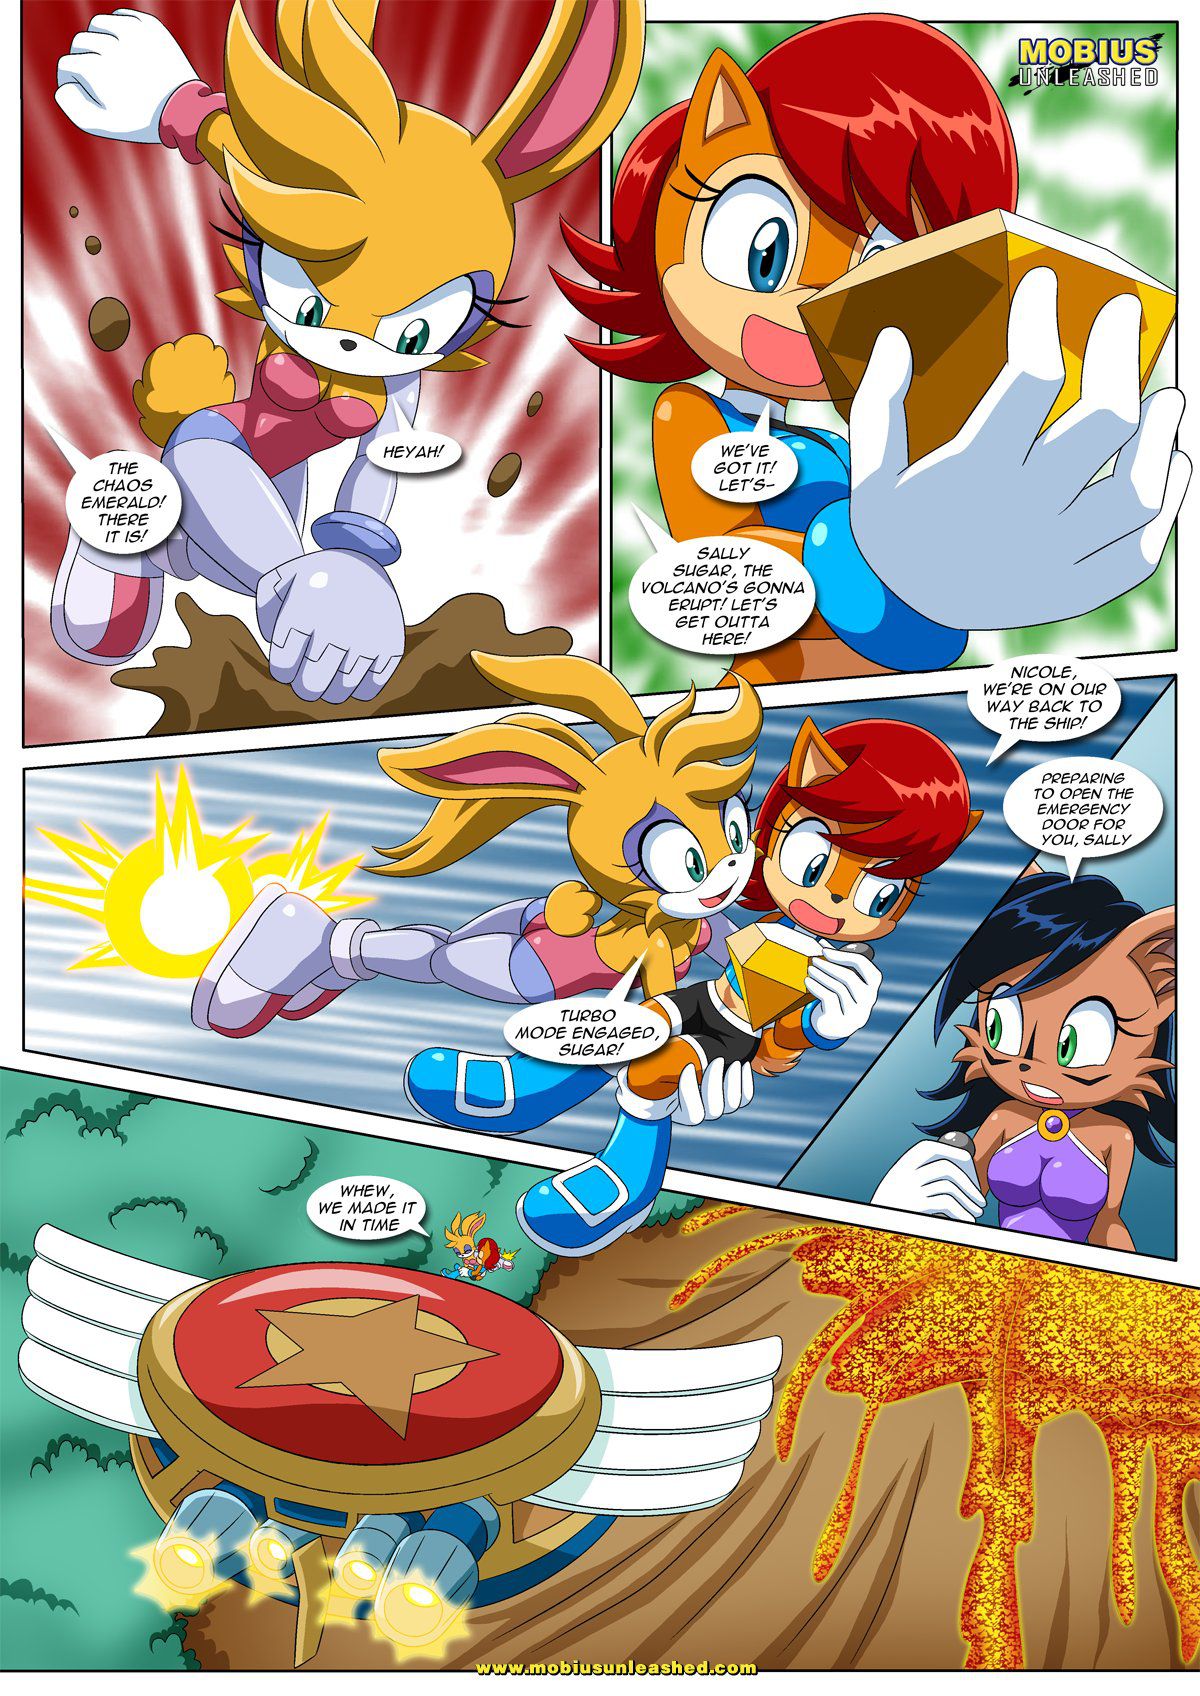 [Palcomix] Sonic Project XXX 4 (Sonic The Hedgehog) [Ongoing] 18